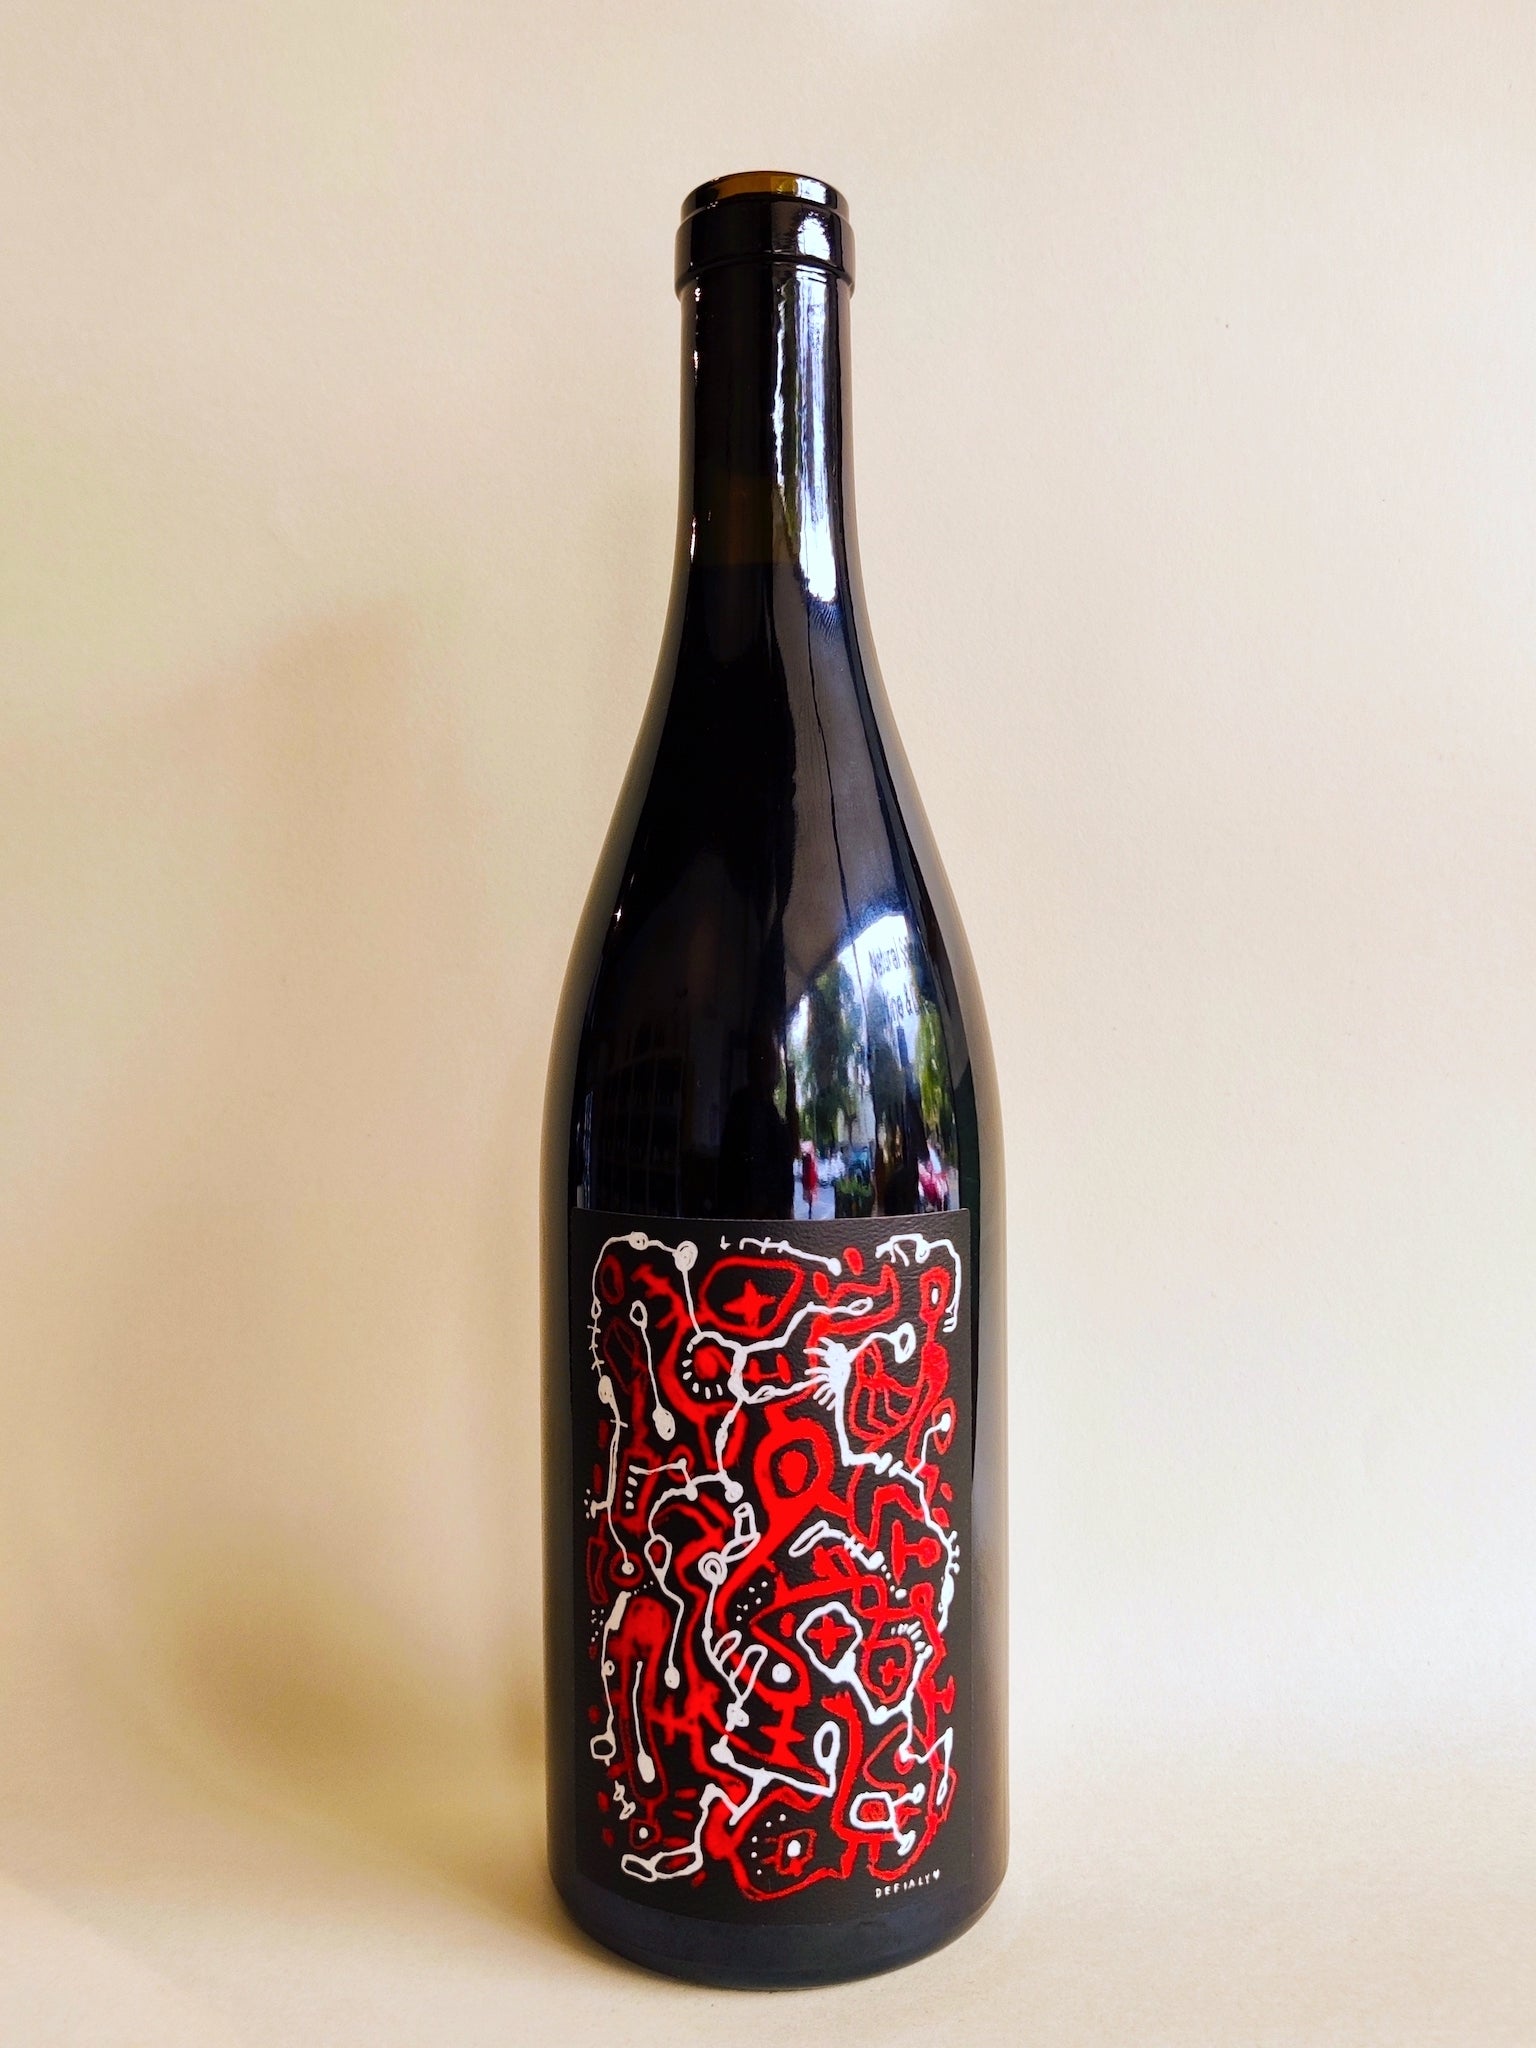 A bottle of DEFIALY Heart of Stone Syrah from Faraday, Victoria. 